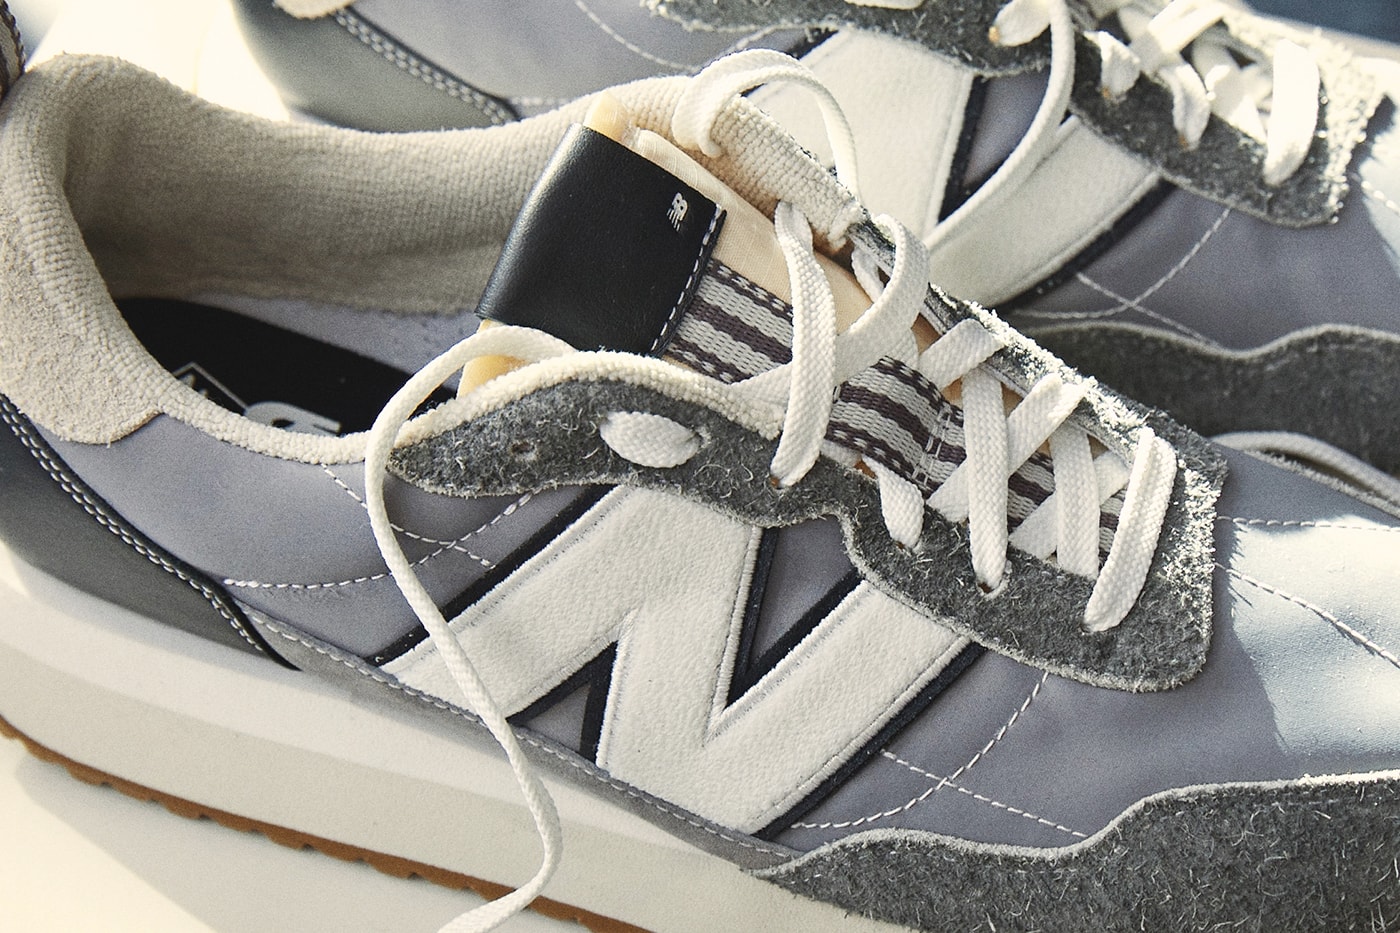 Todd Snyder New Balance 237 Collaboration city gym gray waffle 70s oversized n satin suede release info date price